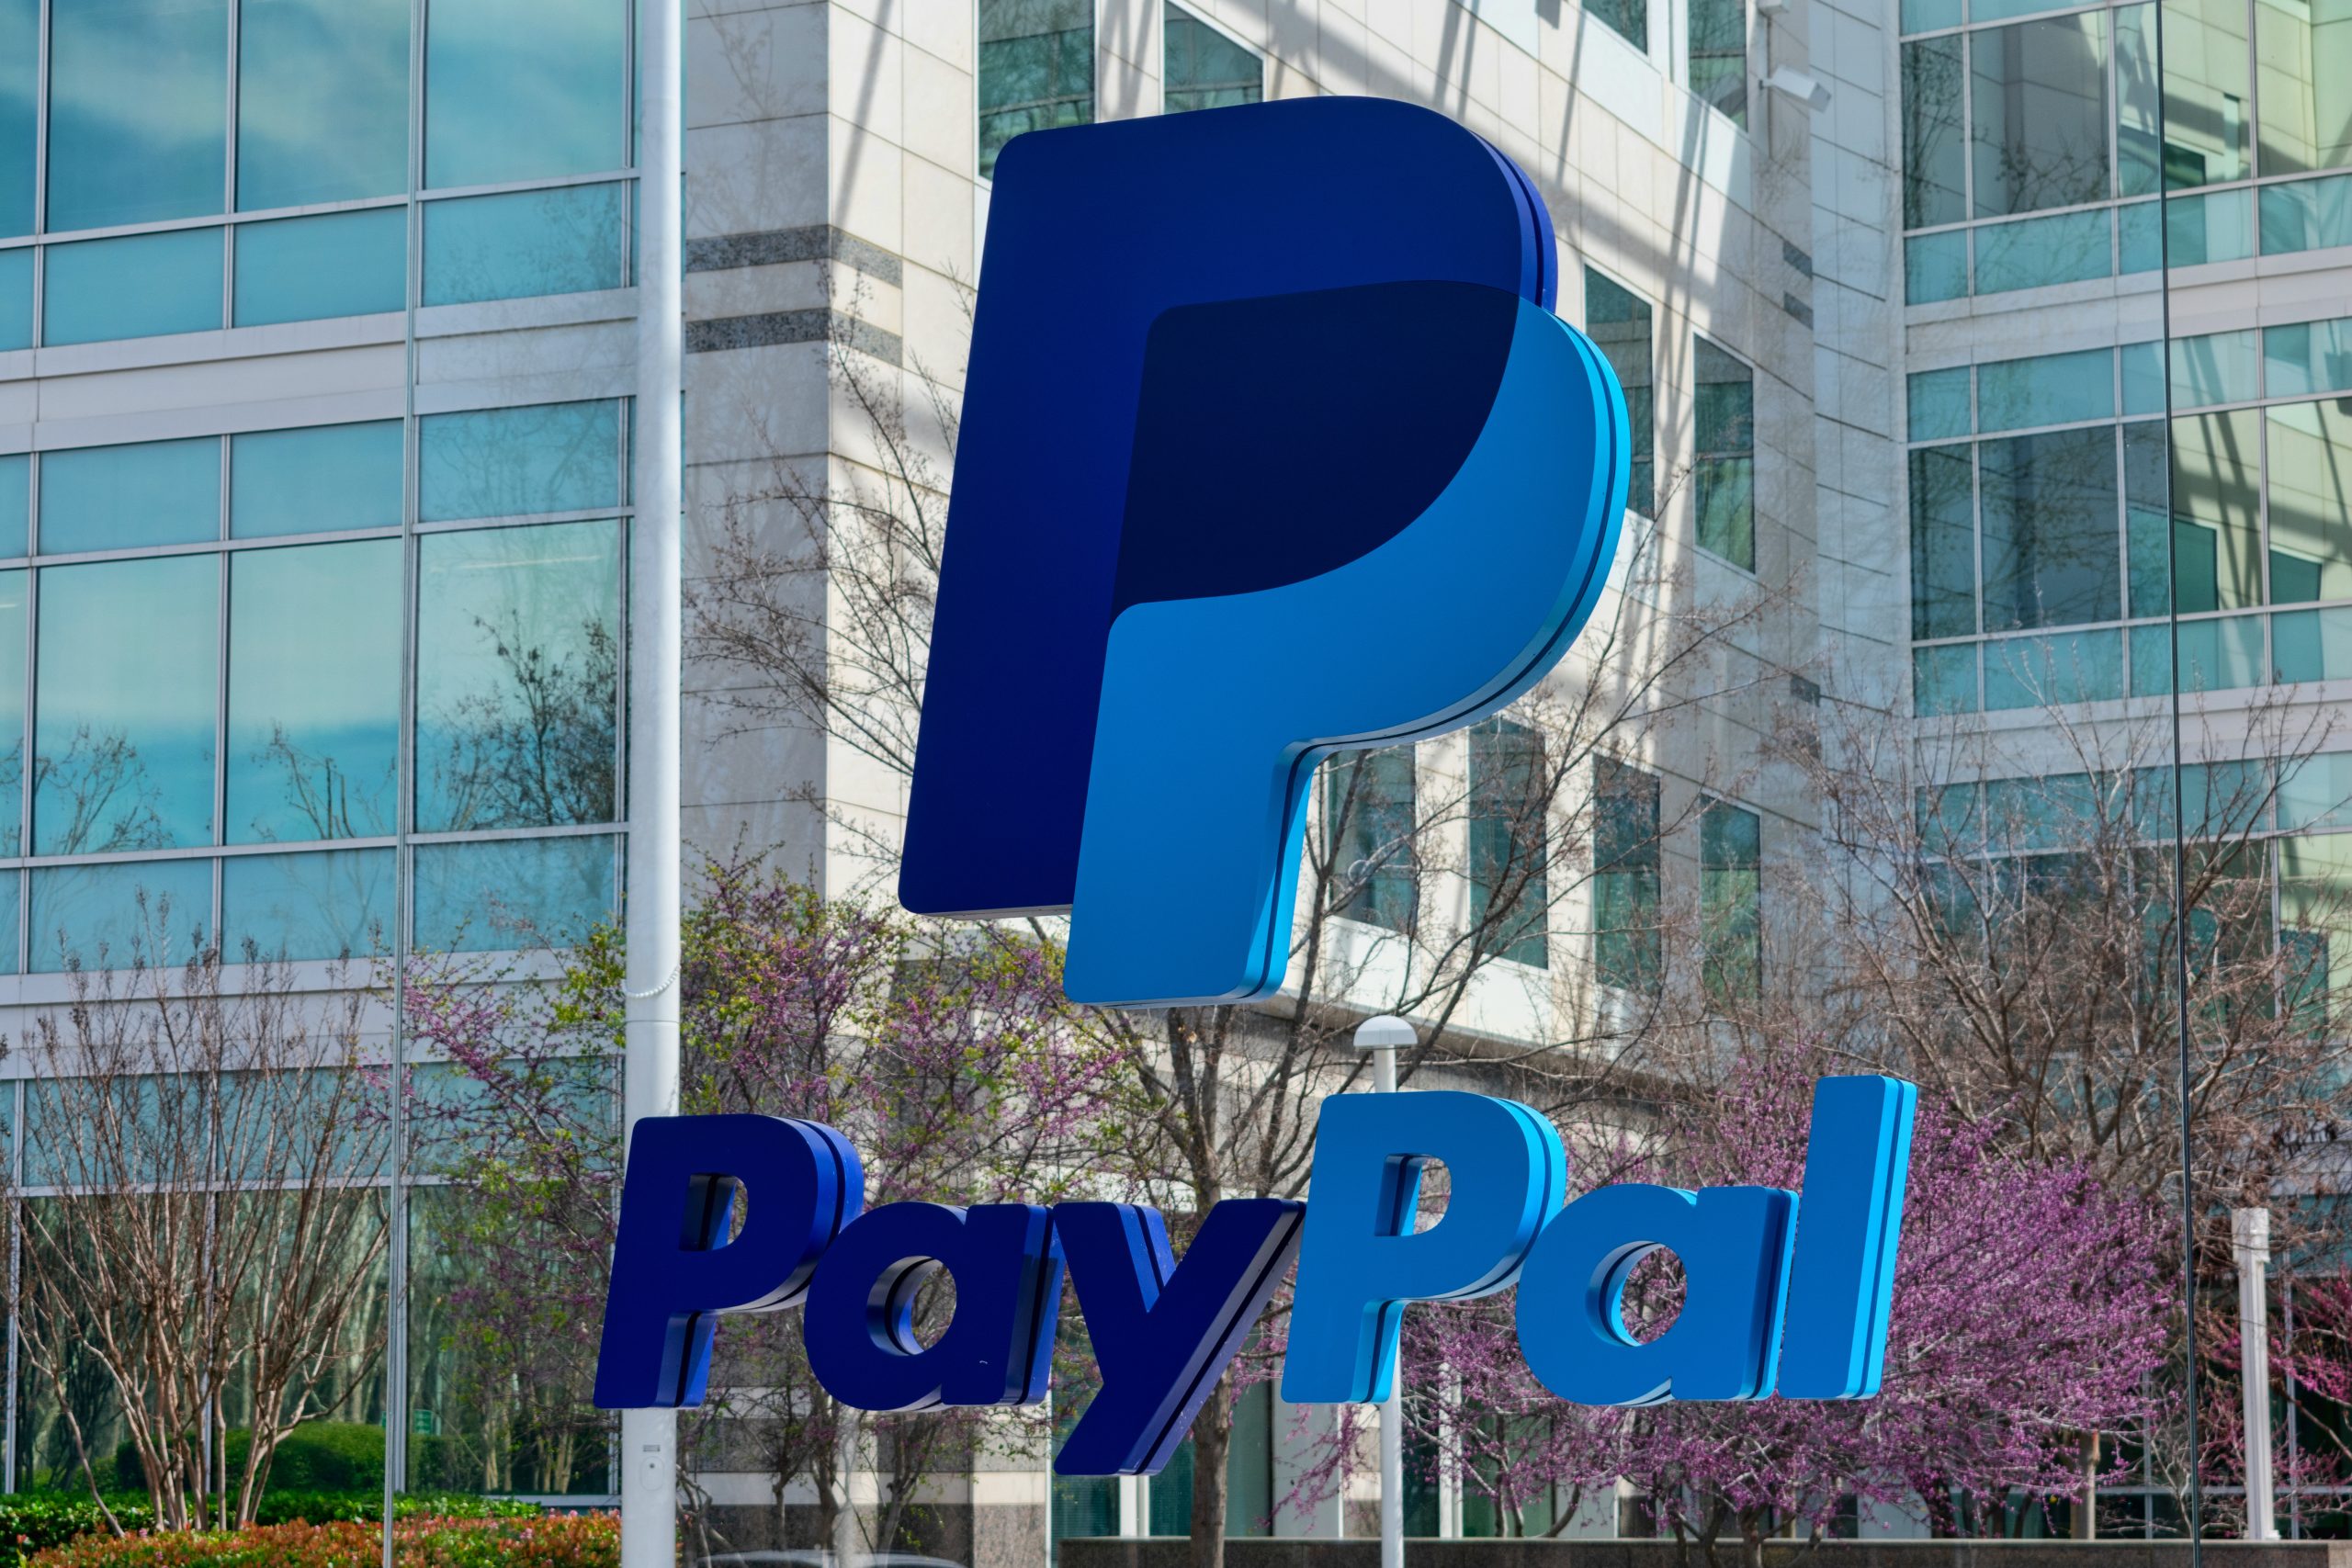 New PayPal Policy Lets Company Seize 2,500 From Users’ Accounts